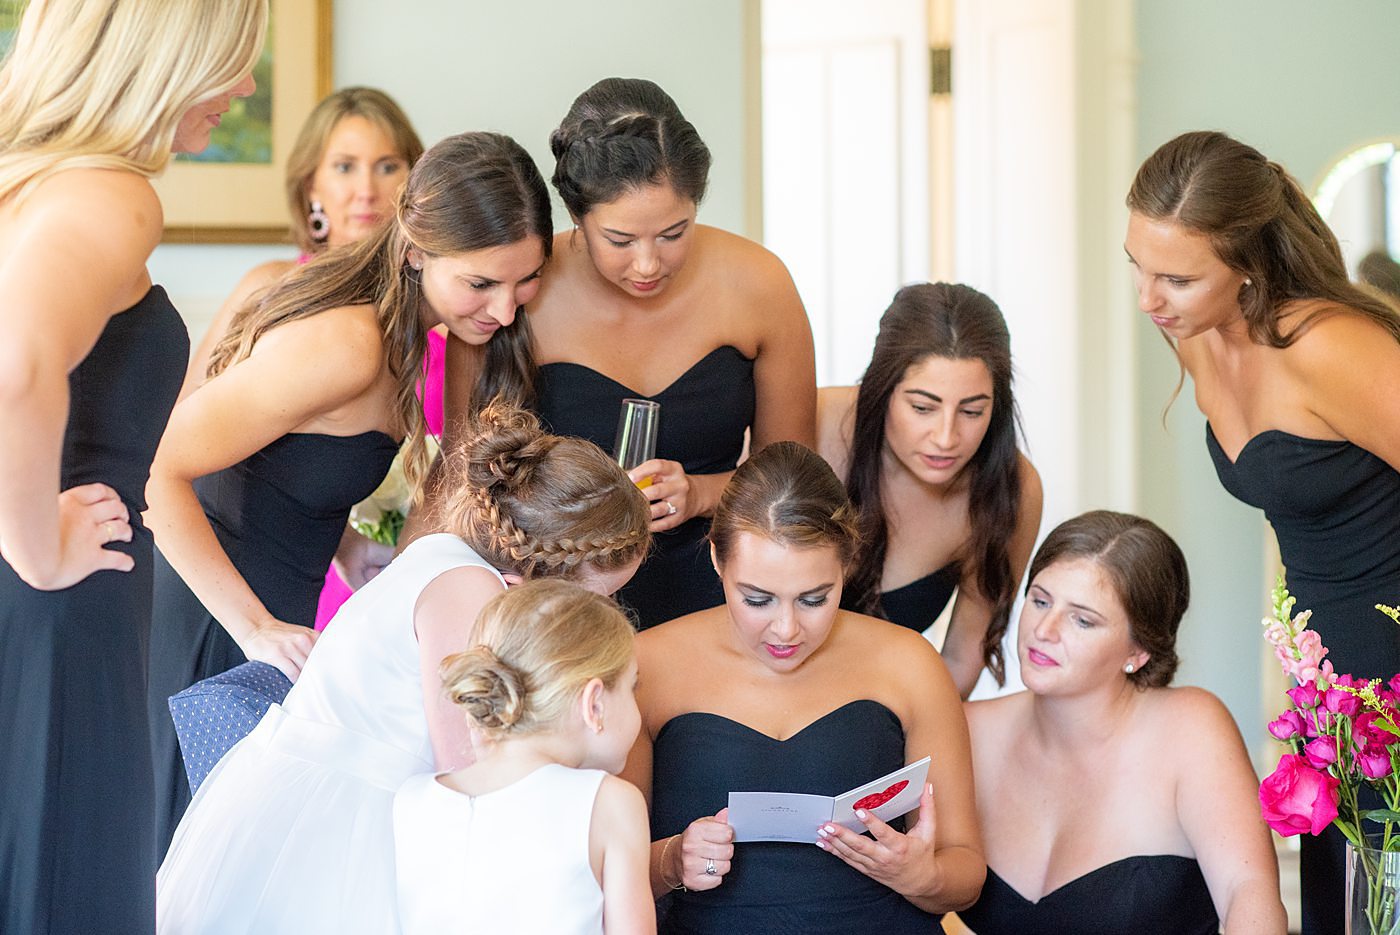 Photos by Mikkel Paige Photography at Waveny House wedding venue in New Canaan, Connecticut. This beautiful venue has an outdoor garden for the ceremony and indoor historic home for the reception. The bride read a card from her soon-to-be-husband before her bridesmaids read it aloud too! #mikkelpaige #wavenyhouse #wavenyhousewedding #connecticutweddingvenue #connecticutweddingphotographer #weddinggifts